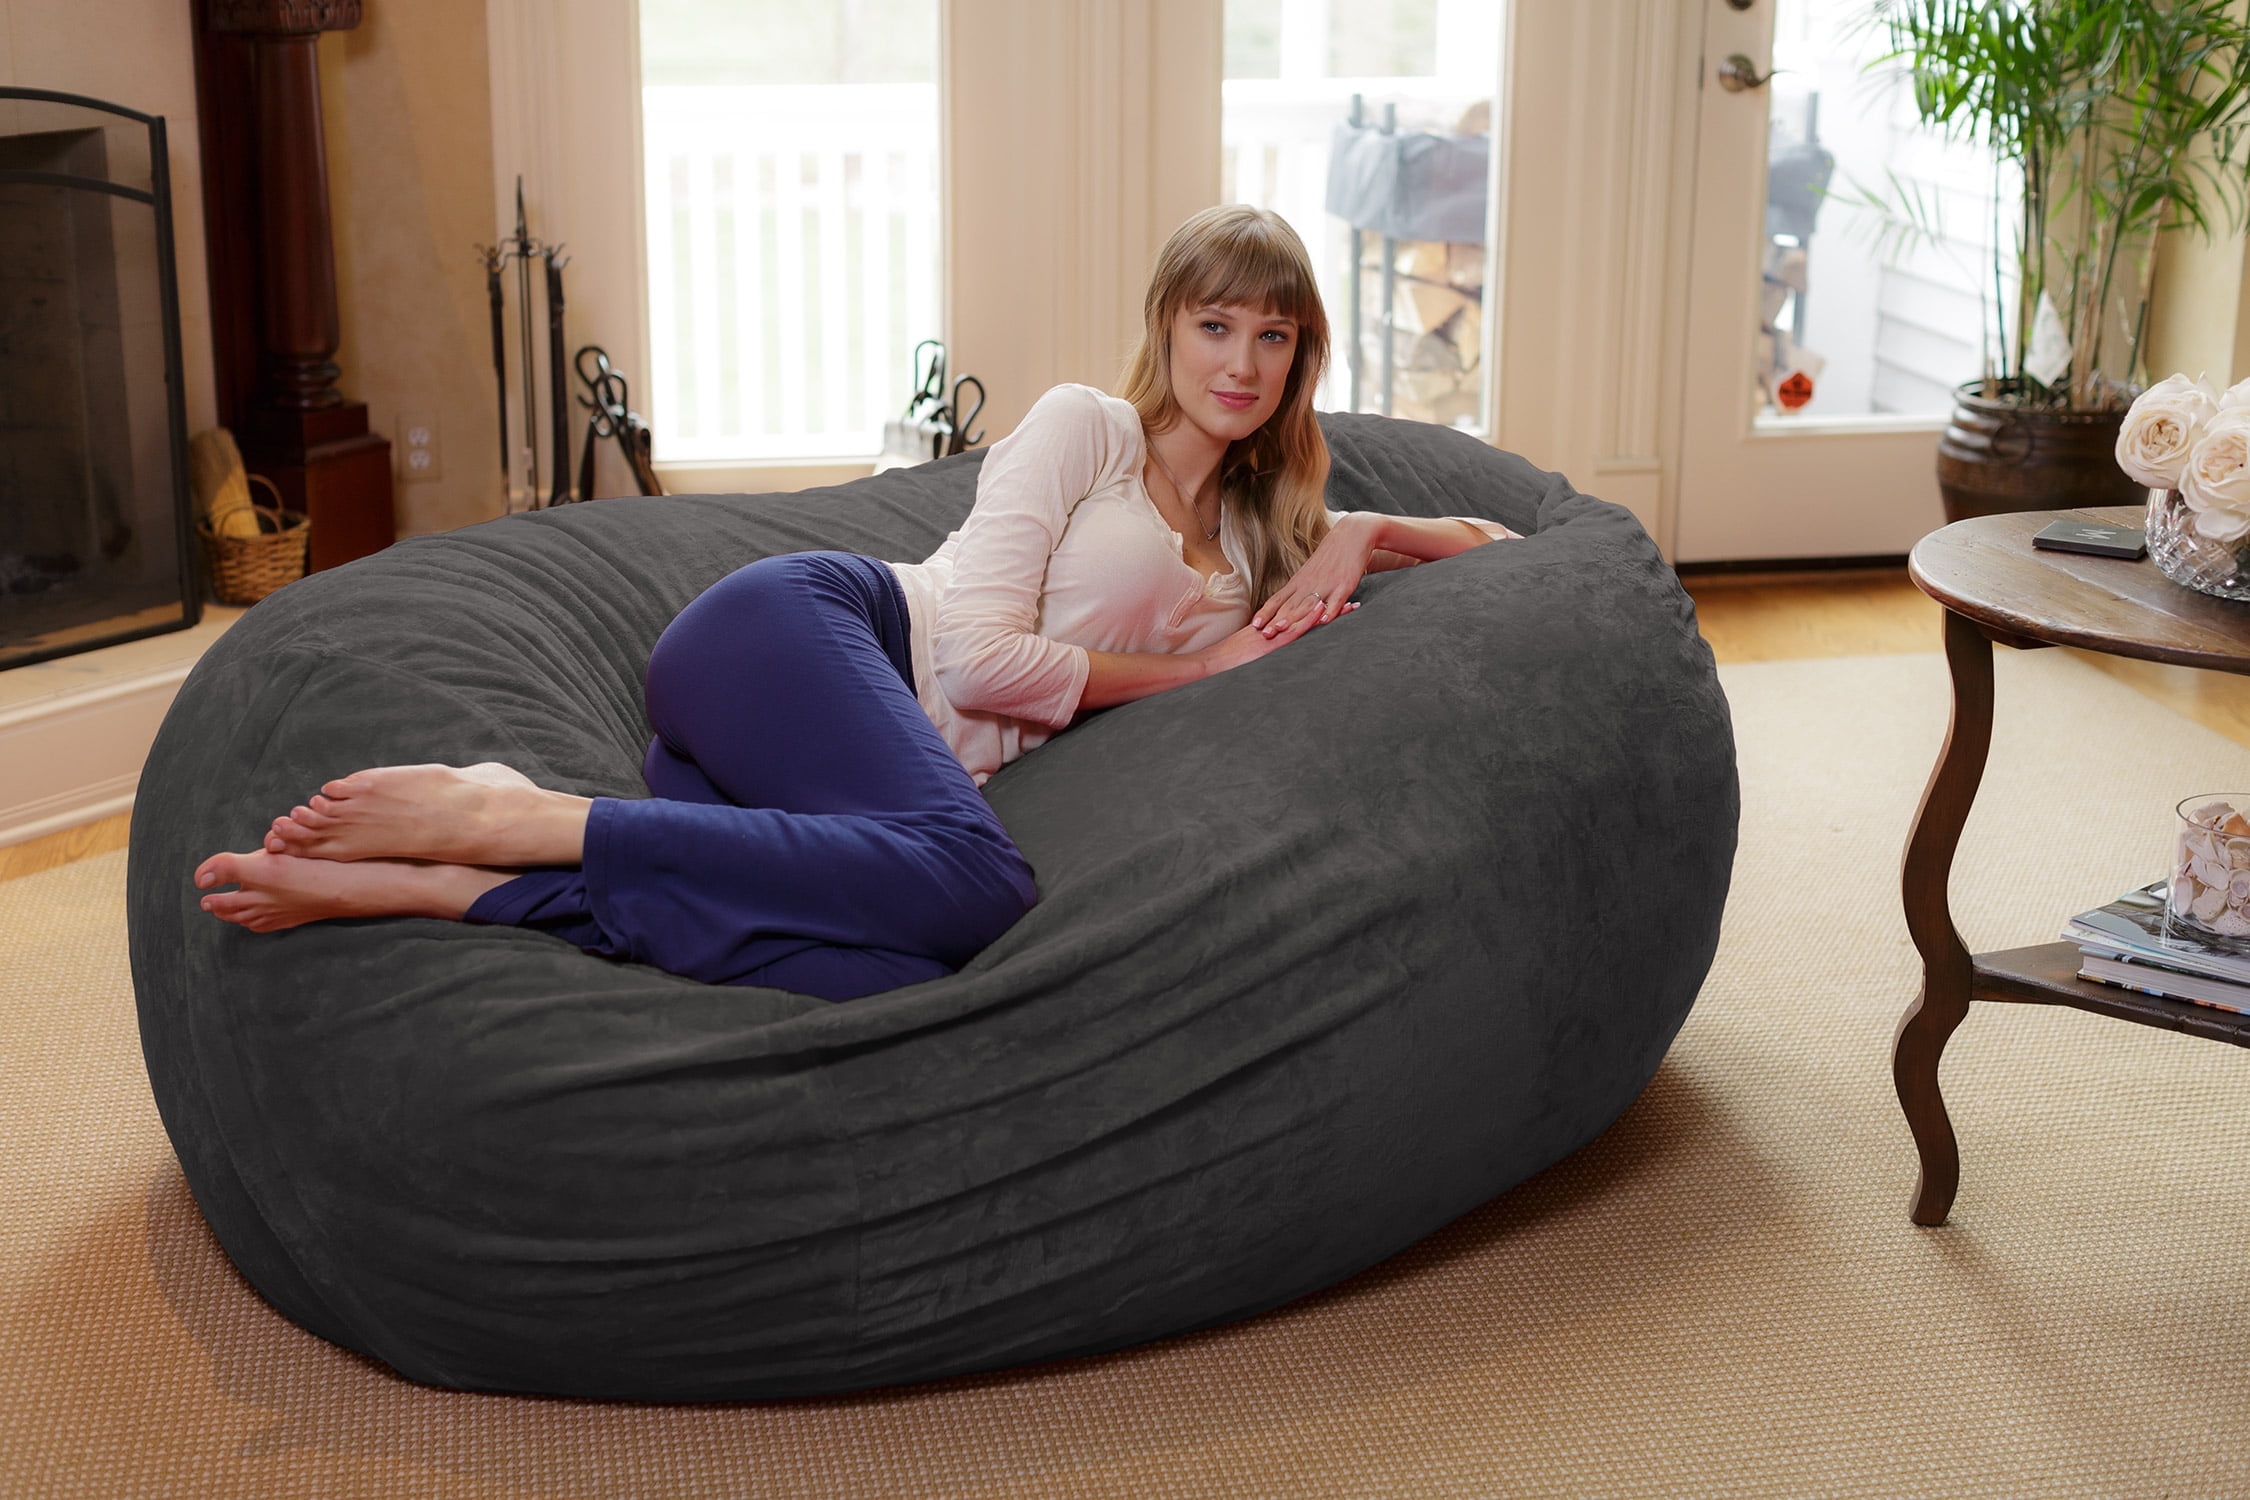  Big Huge Giant Bean Bag Chair for Adults, (No Filler) Bean Bag  Chairs in Multiple Sizes and Colors Giant Foam-Filled Furniture - Machine  Washable Covers, Double Stitched Seams (Orange,5FT) : Home